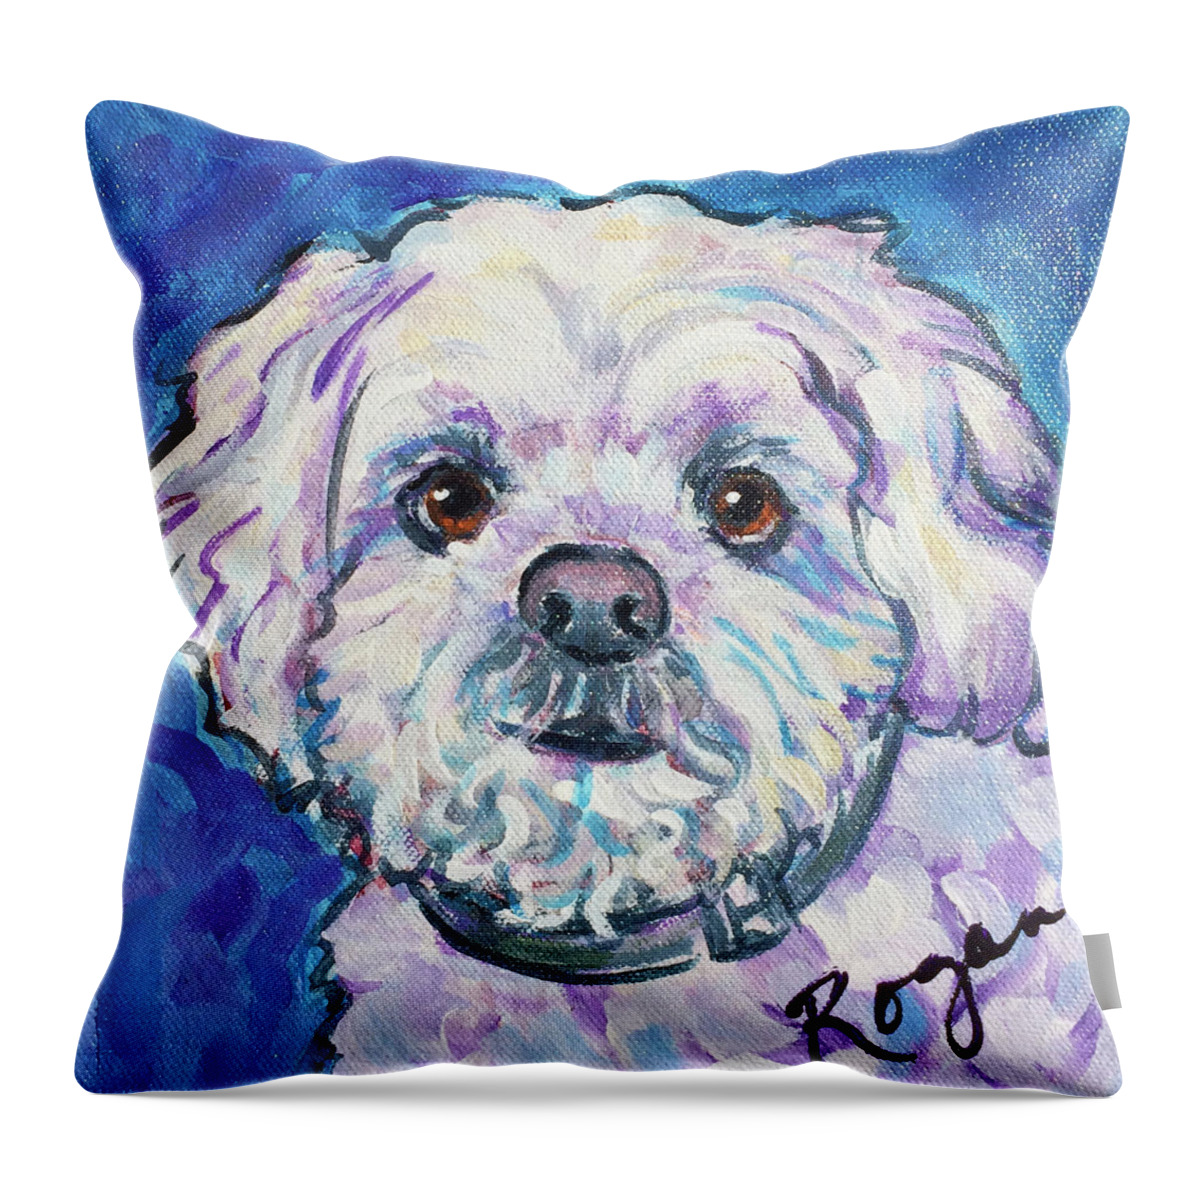  Throw Pillow featuring the painting Derby by Judy Rogan